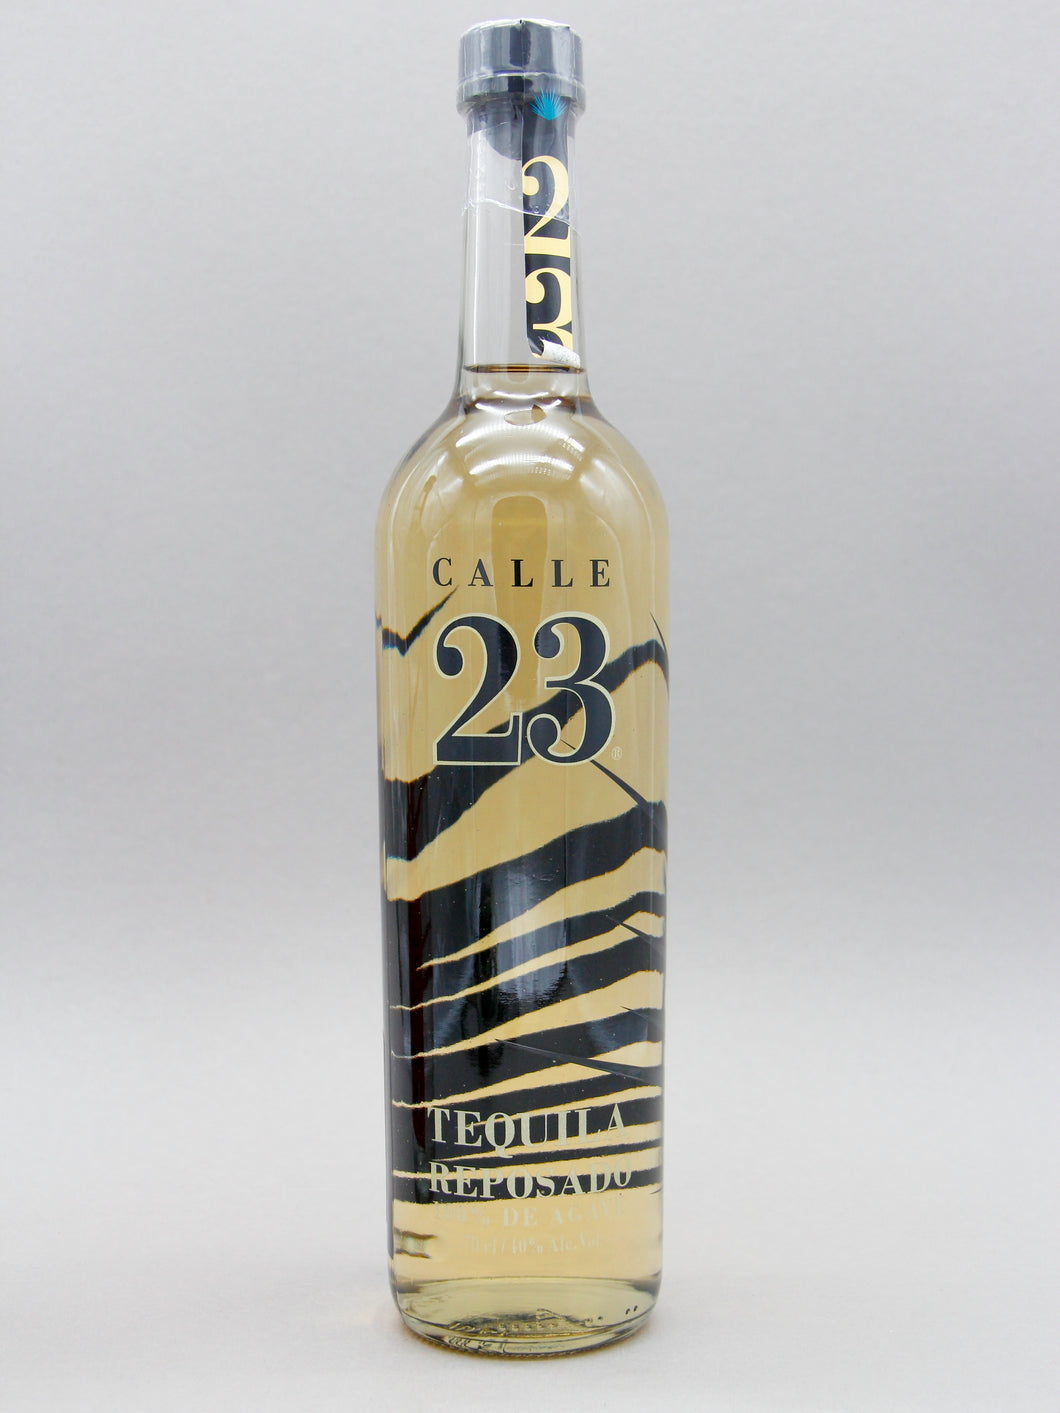 Calle 23 Reposado Tequila, 100% Agave (40%, 70cl)